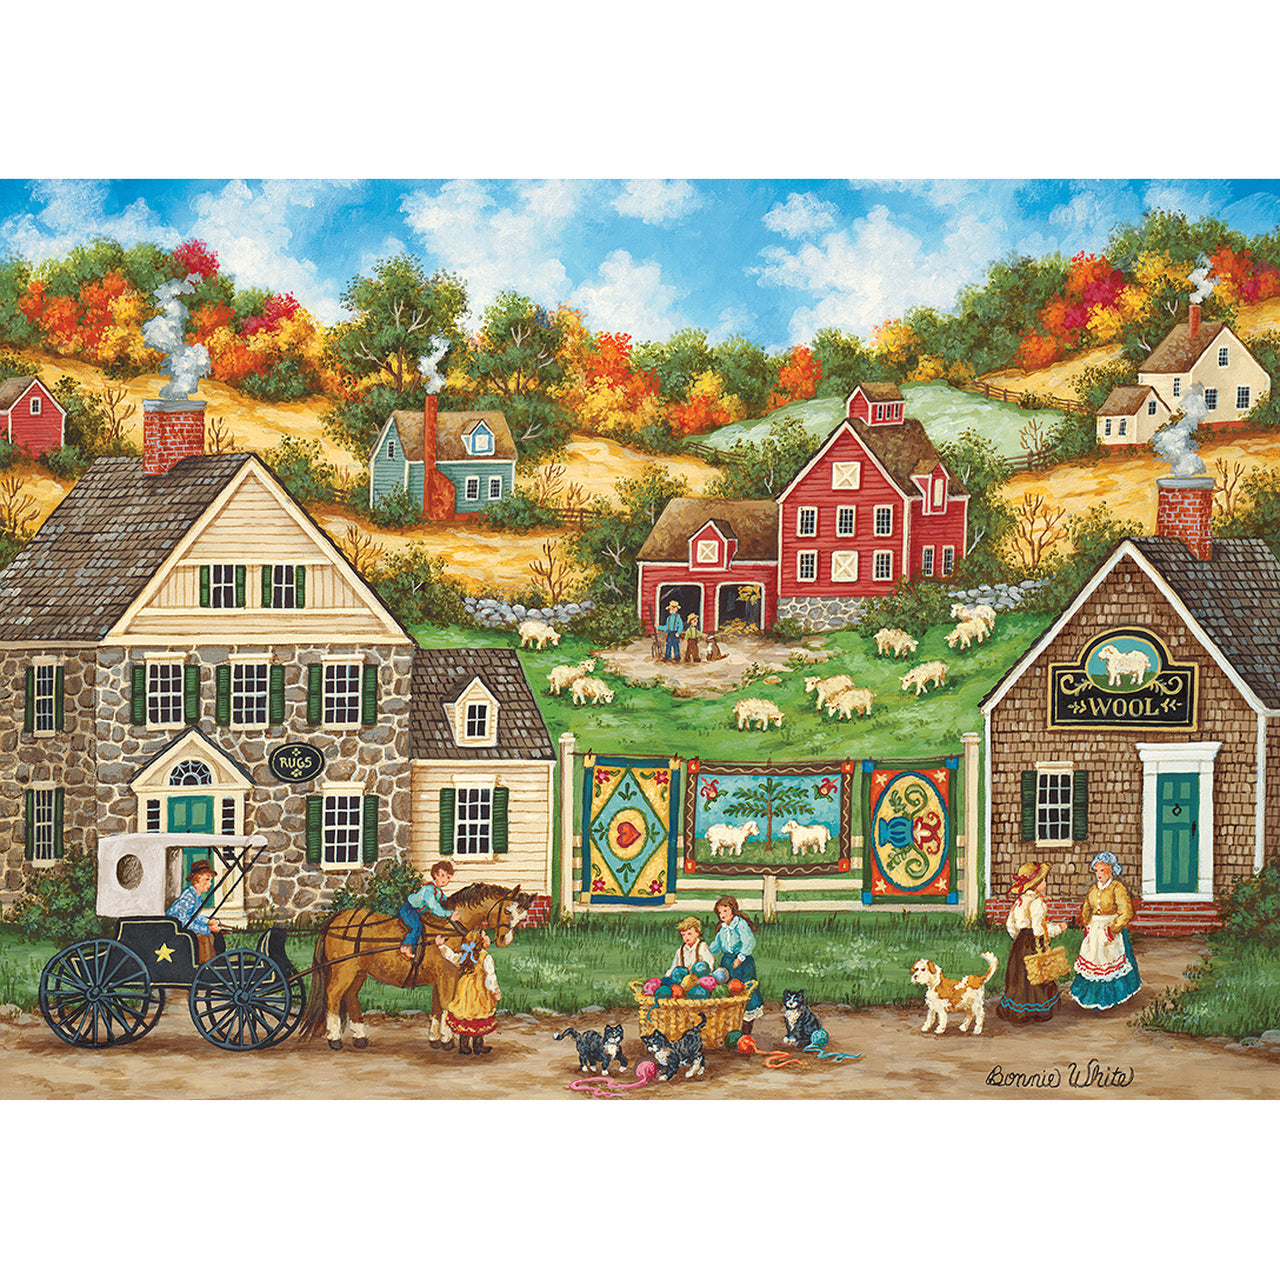 Hometown Gallery - Great Balls of Yarn 1000 Piece Jigsaw Puzzle by Masterpieces